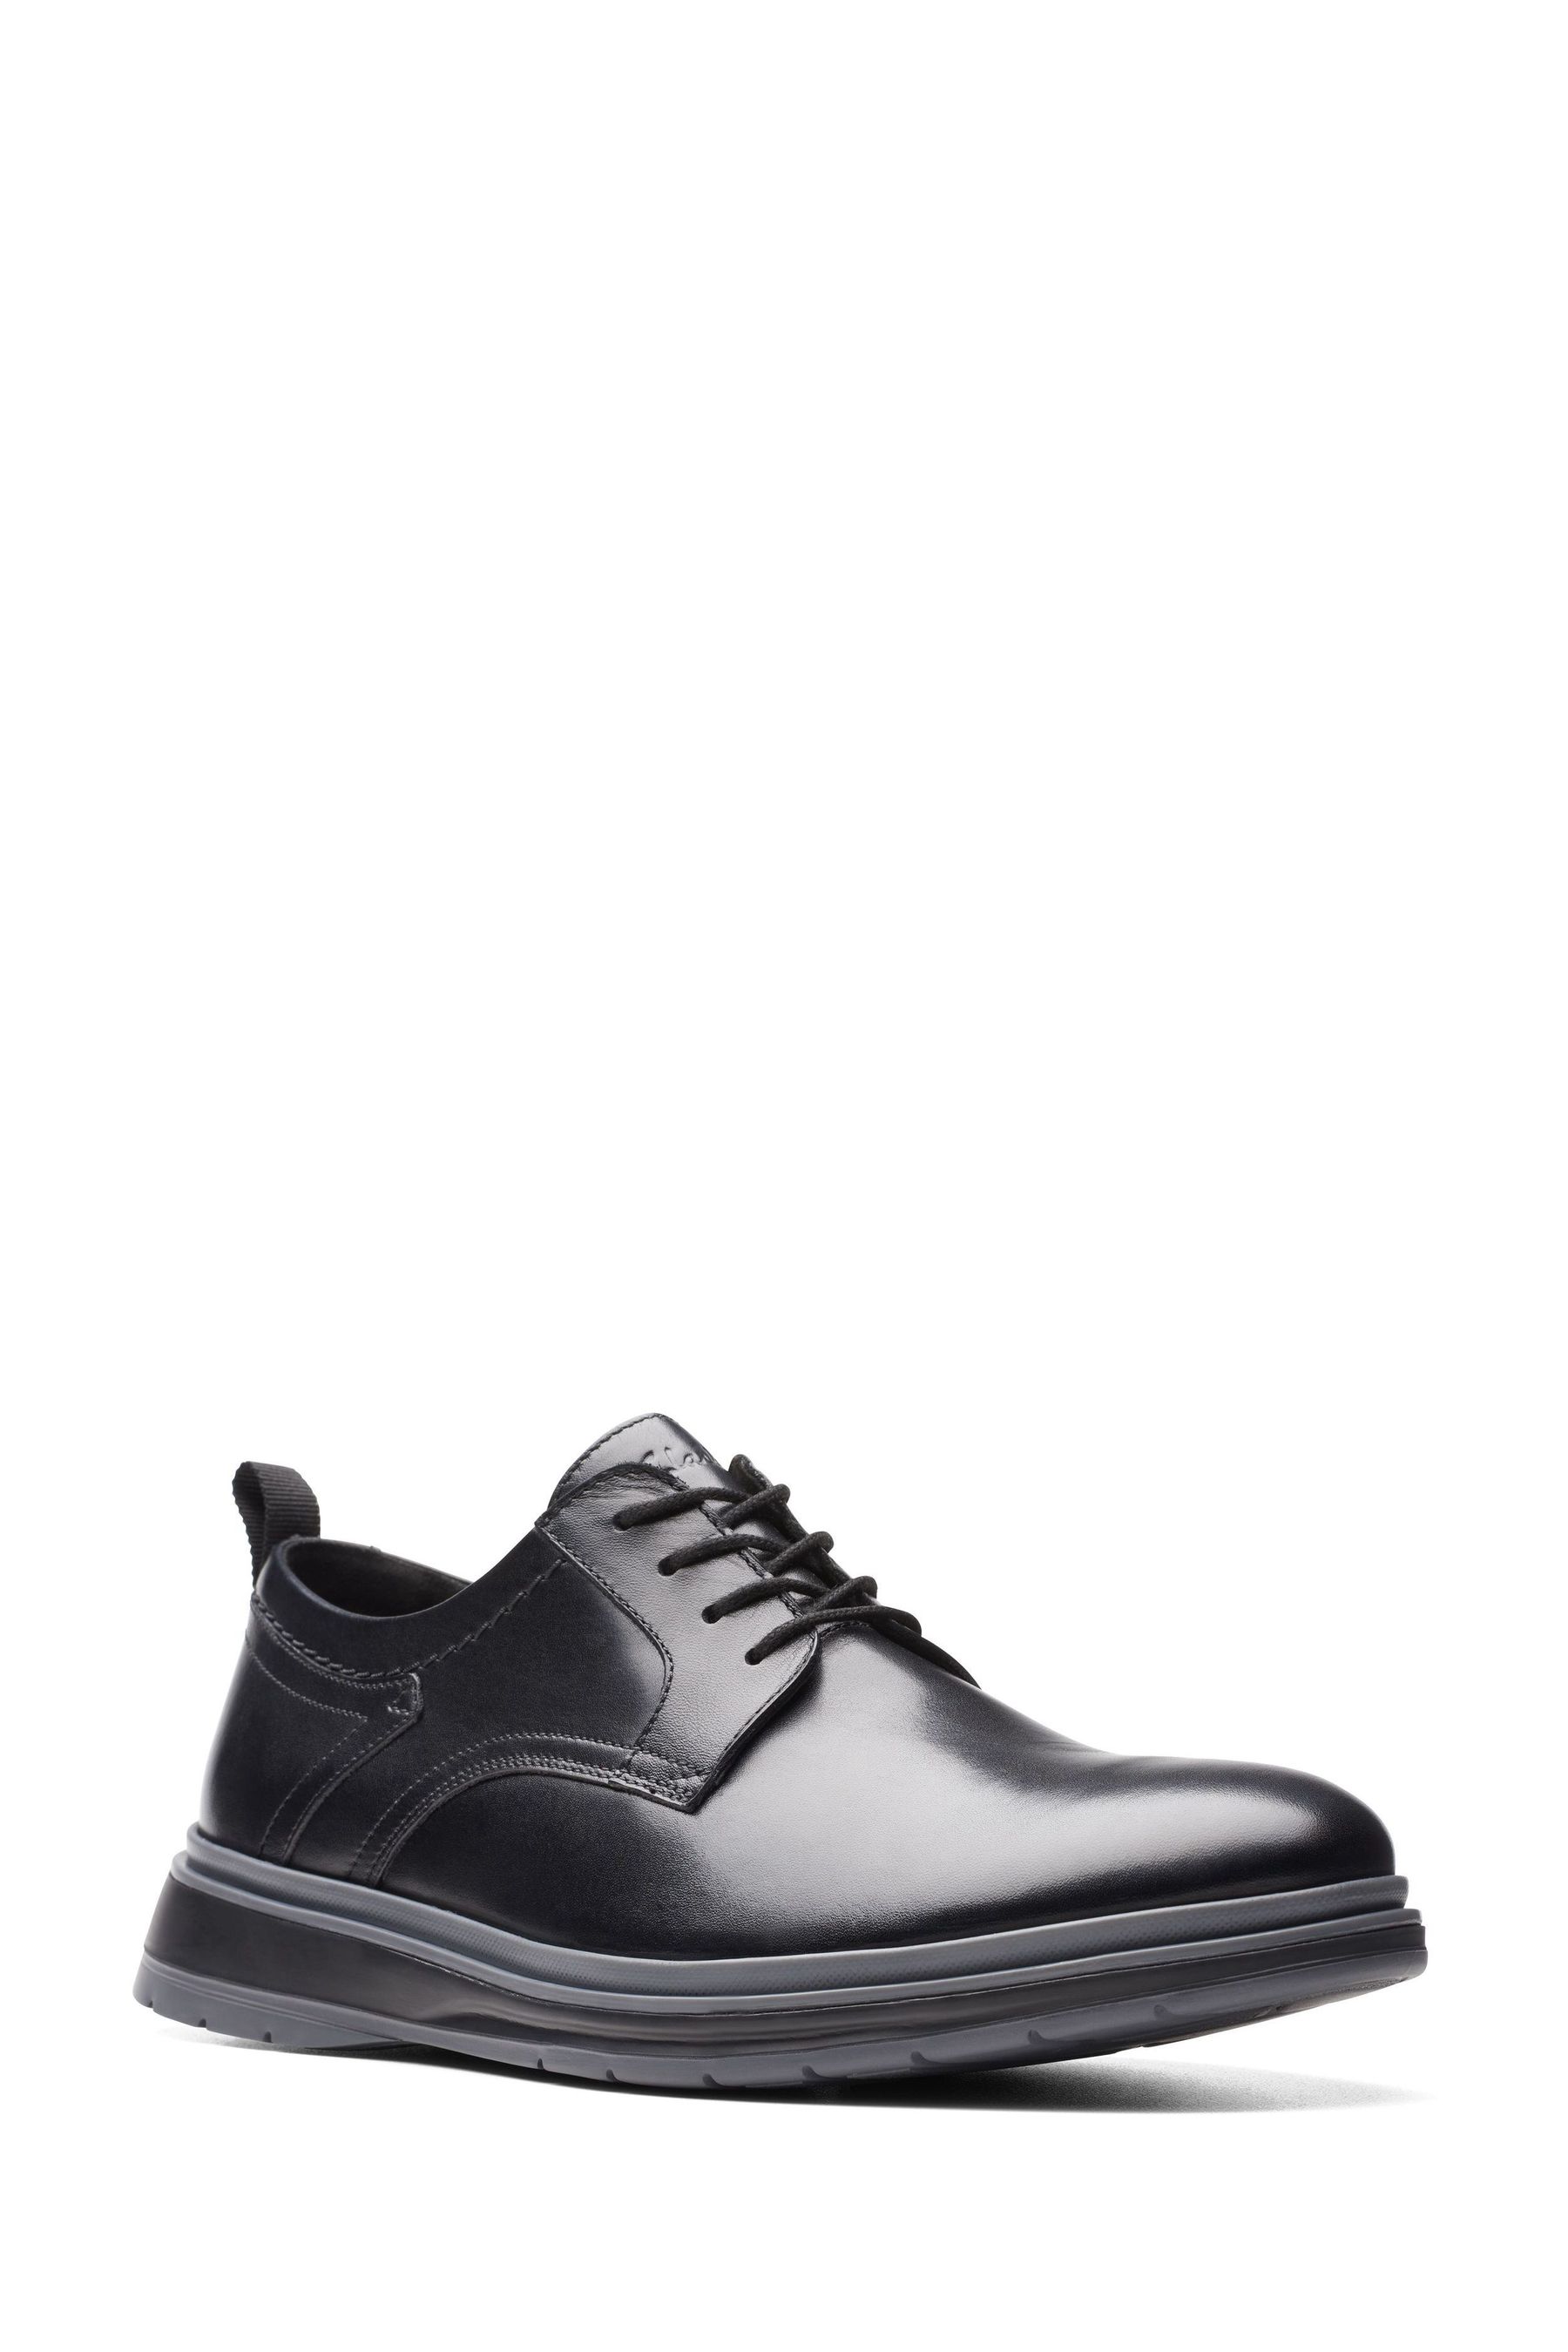 Buy Clarks Black Clarks Leather Chantry Lo Shoes from the Next UK ...